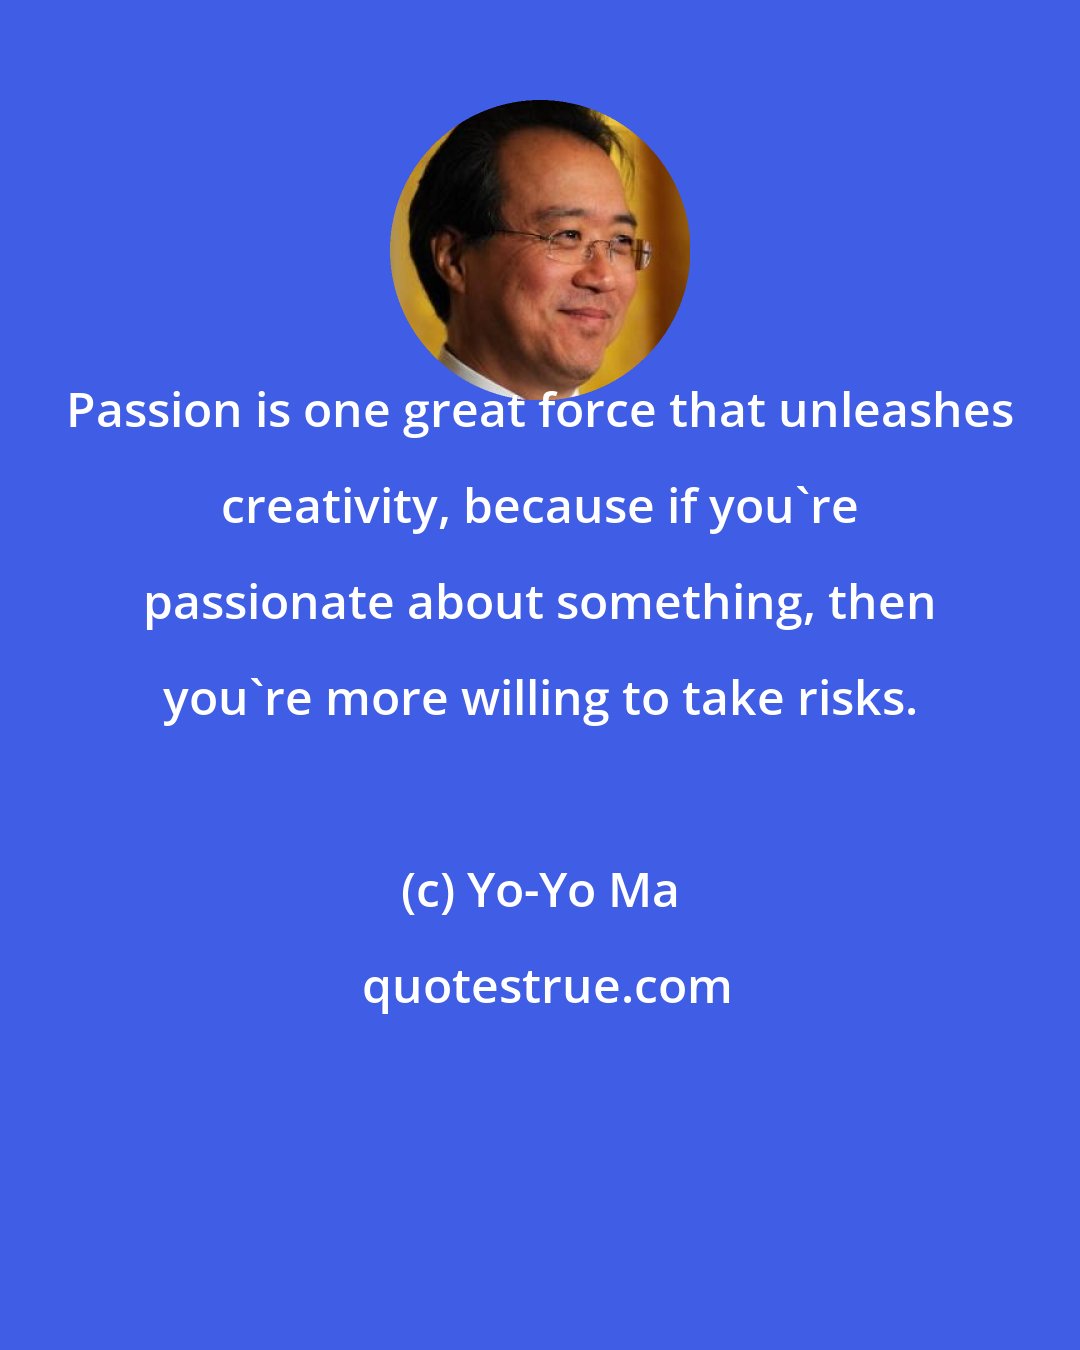 Yo-Yo Ma: Passion is one great force that unleashes creativity, because if you're passionate about something, then you're more willing to take risks.